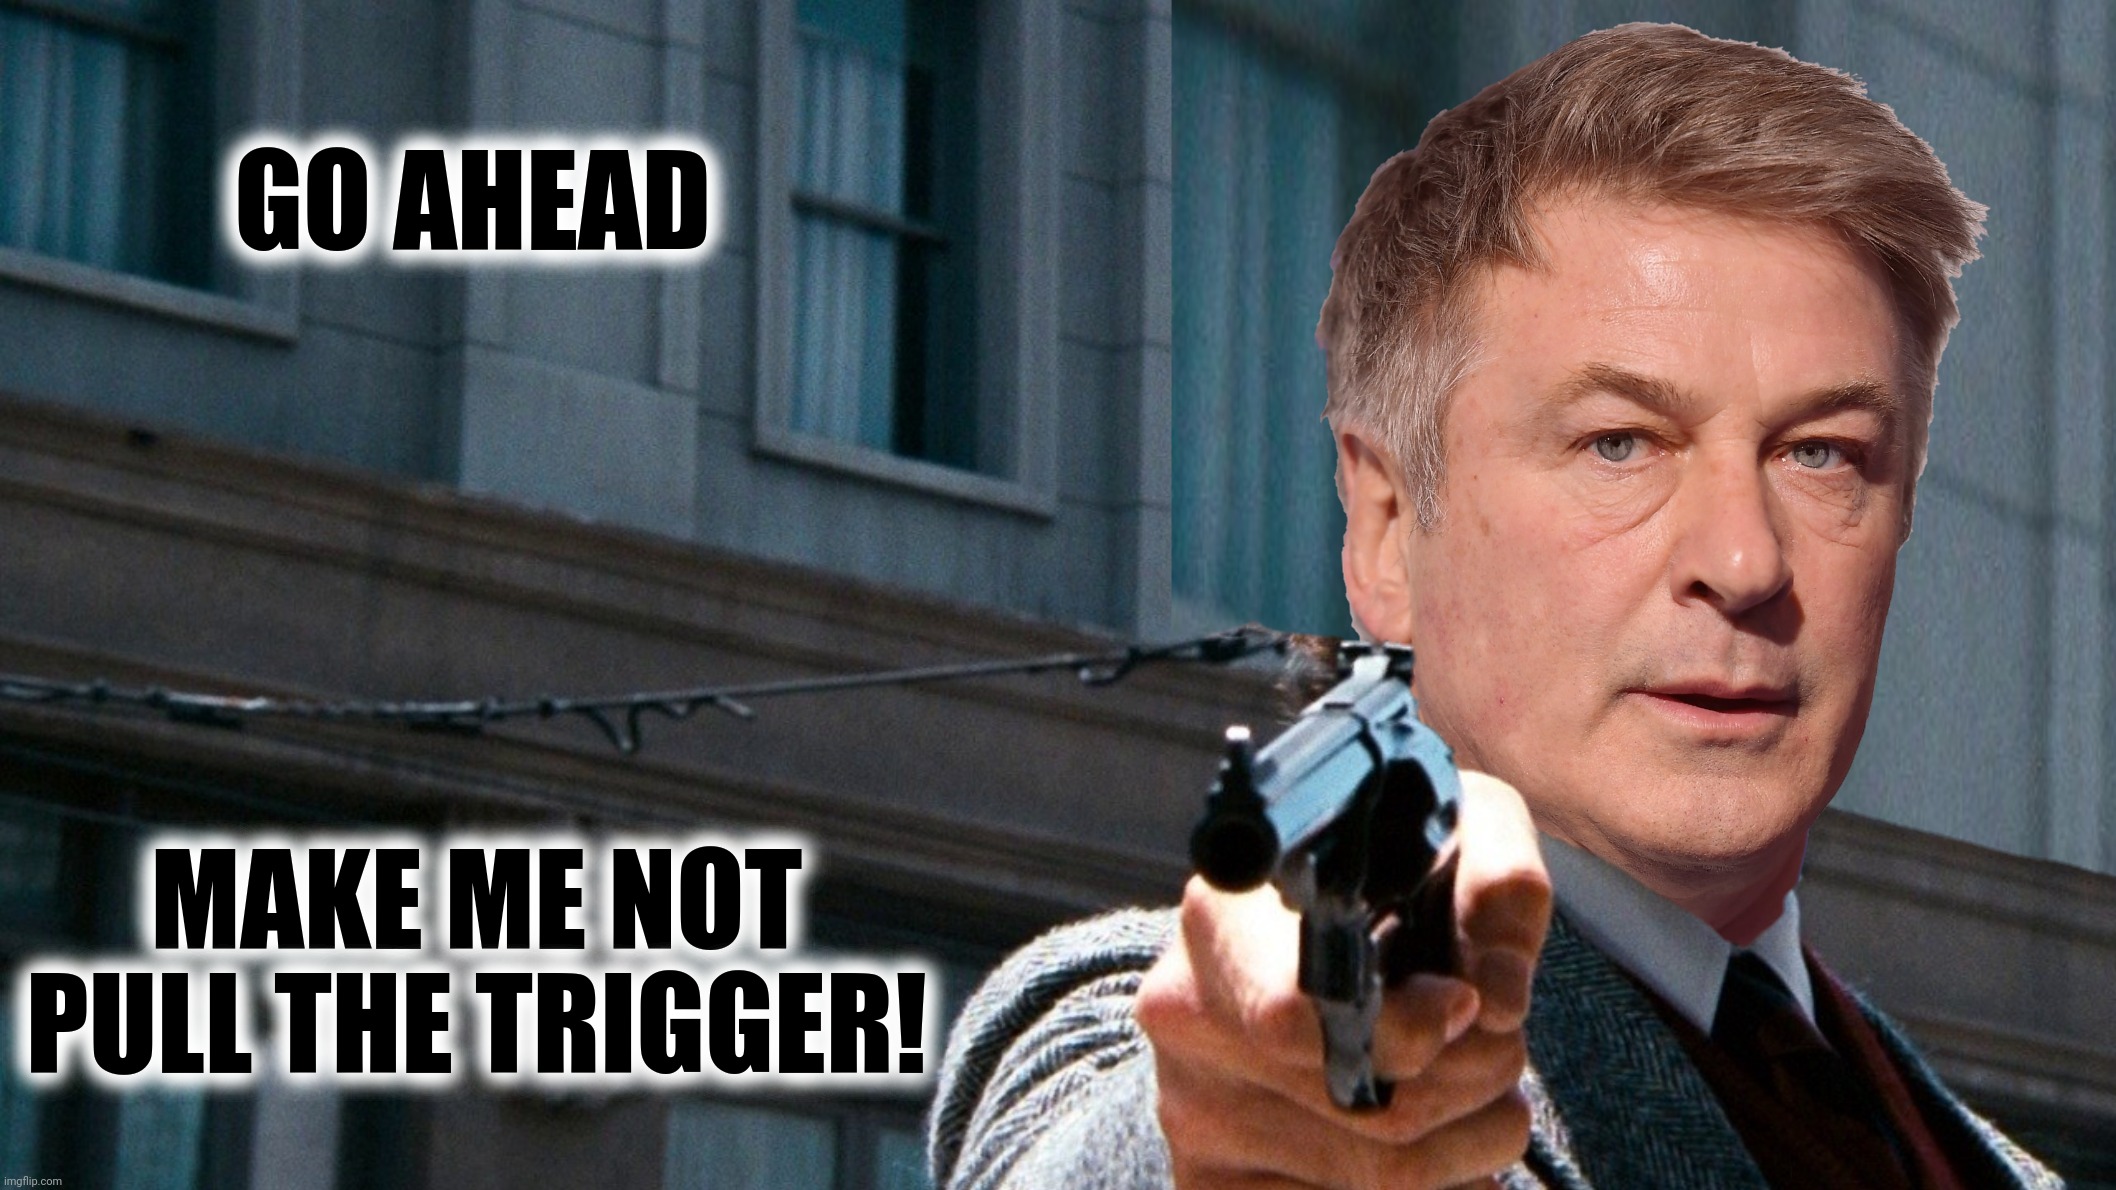 GO AHEAD MAKE ME NOT PULL THE TRIGGER! | made w/ Imgflip meme maker